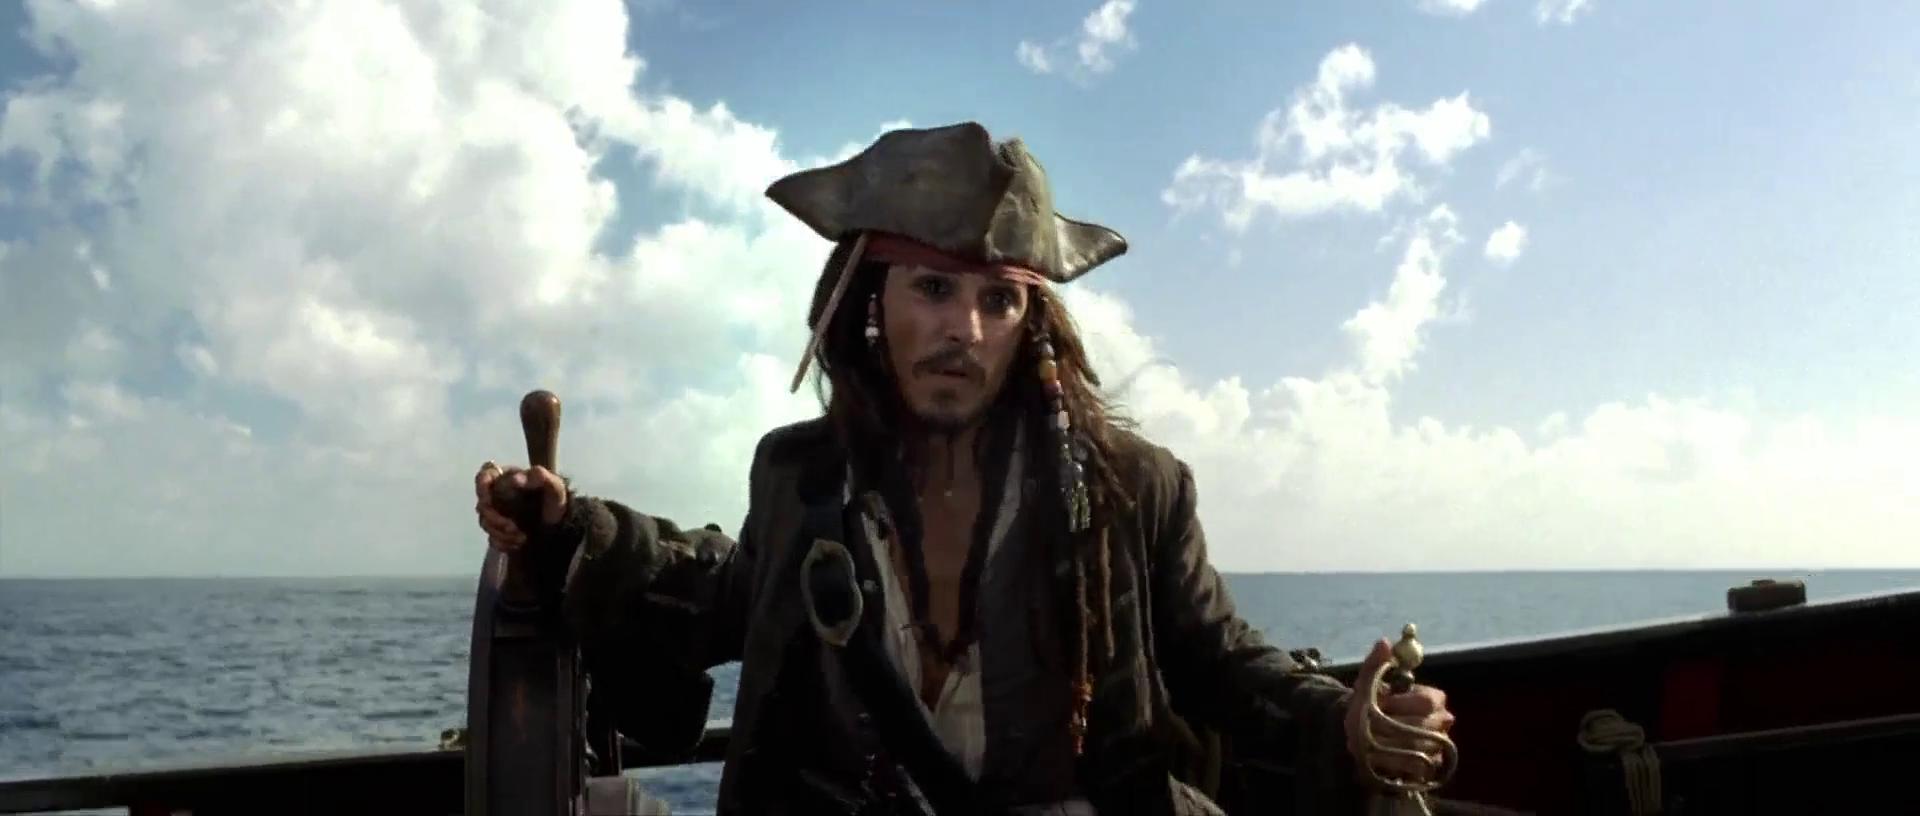 Pirates of the caribbean the curse of the black pearl movie torrent download